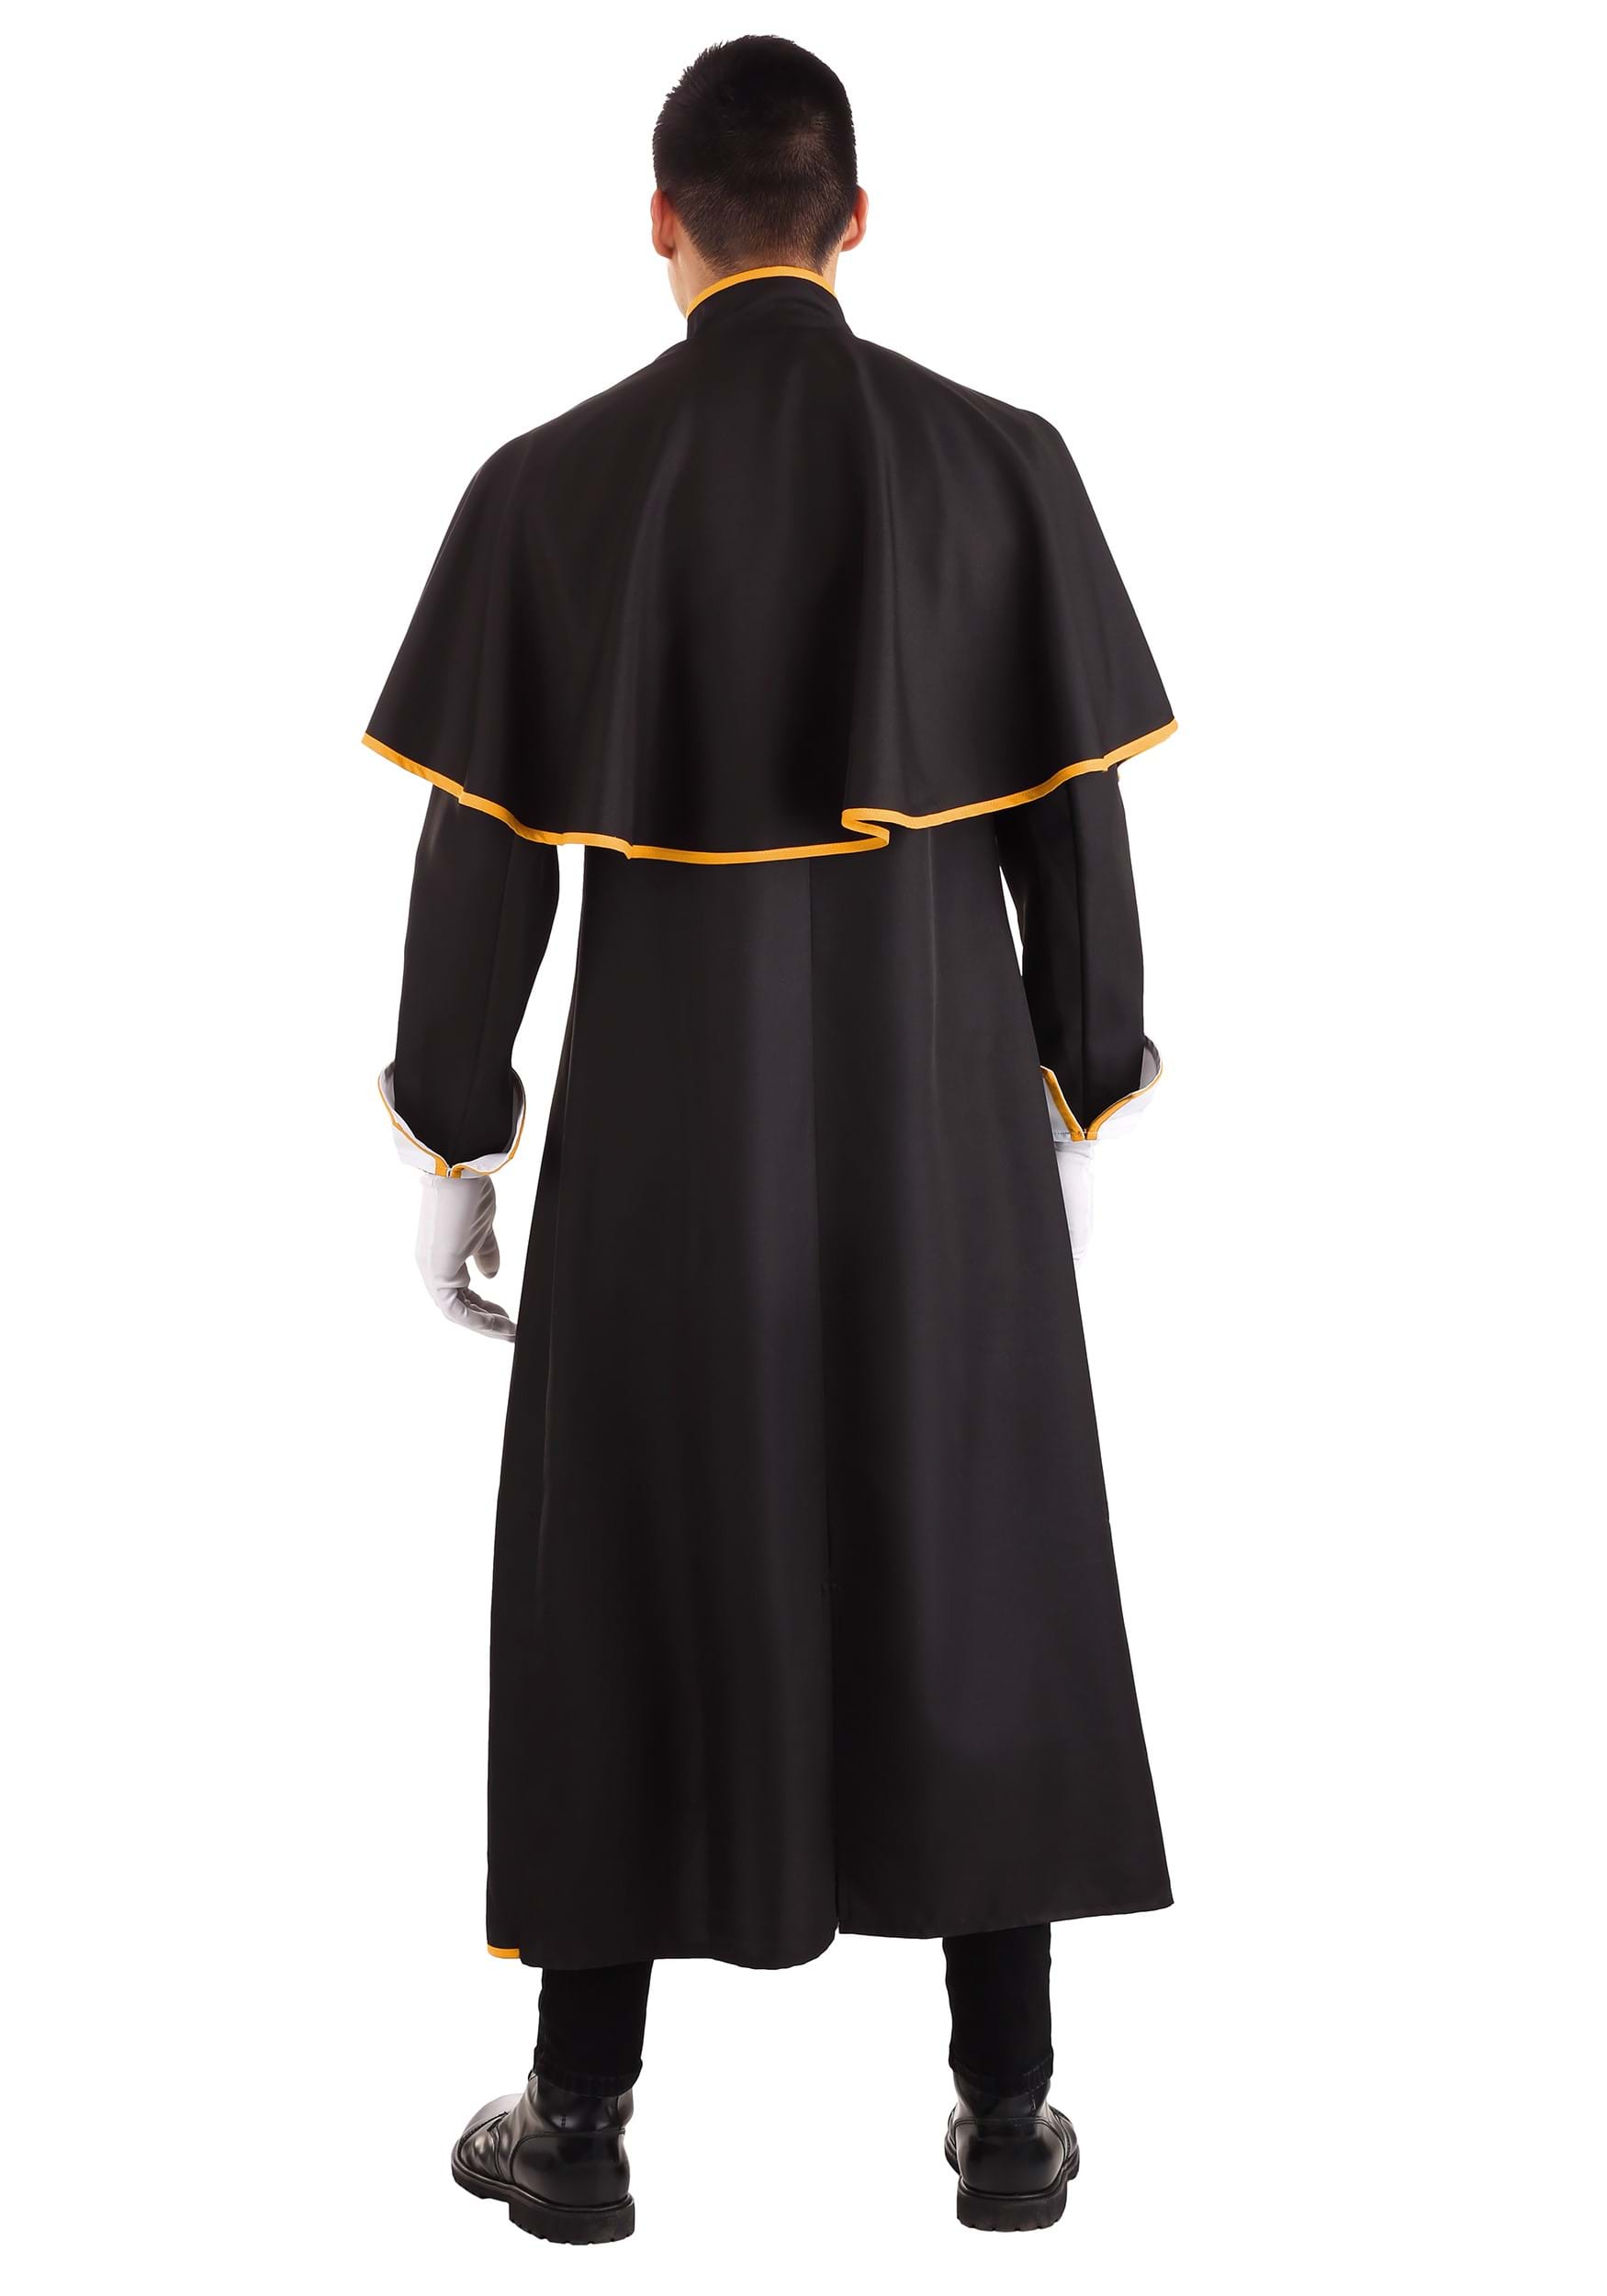 Holy Priest Fancy Dress Costume , Religious Fancy Dress Costumes